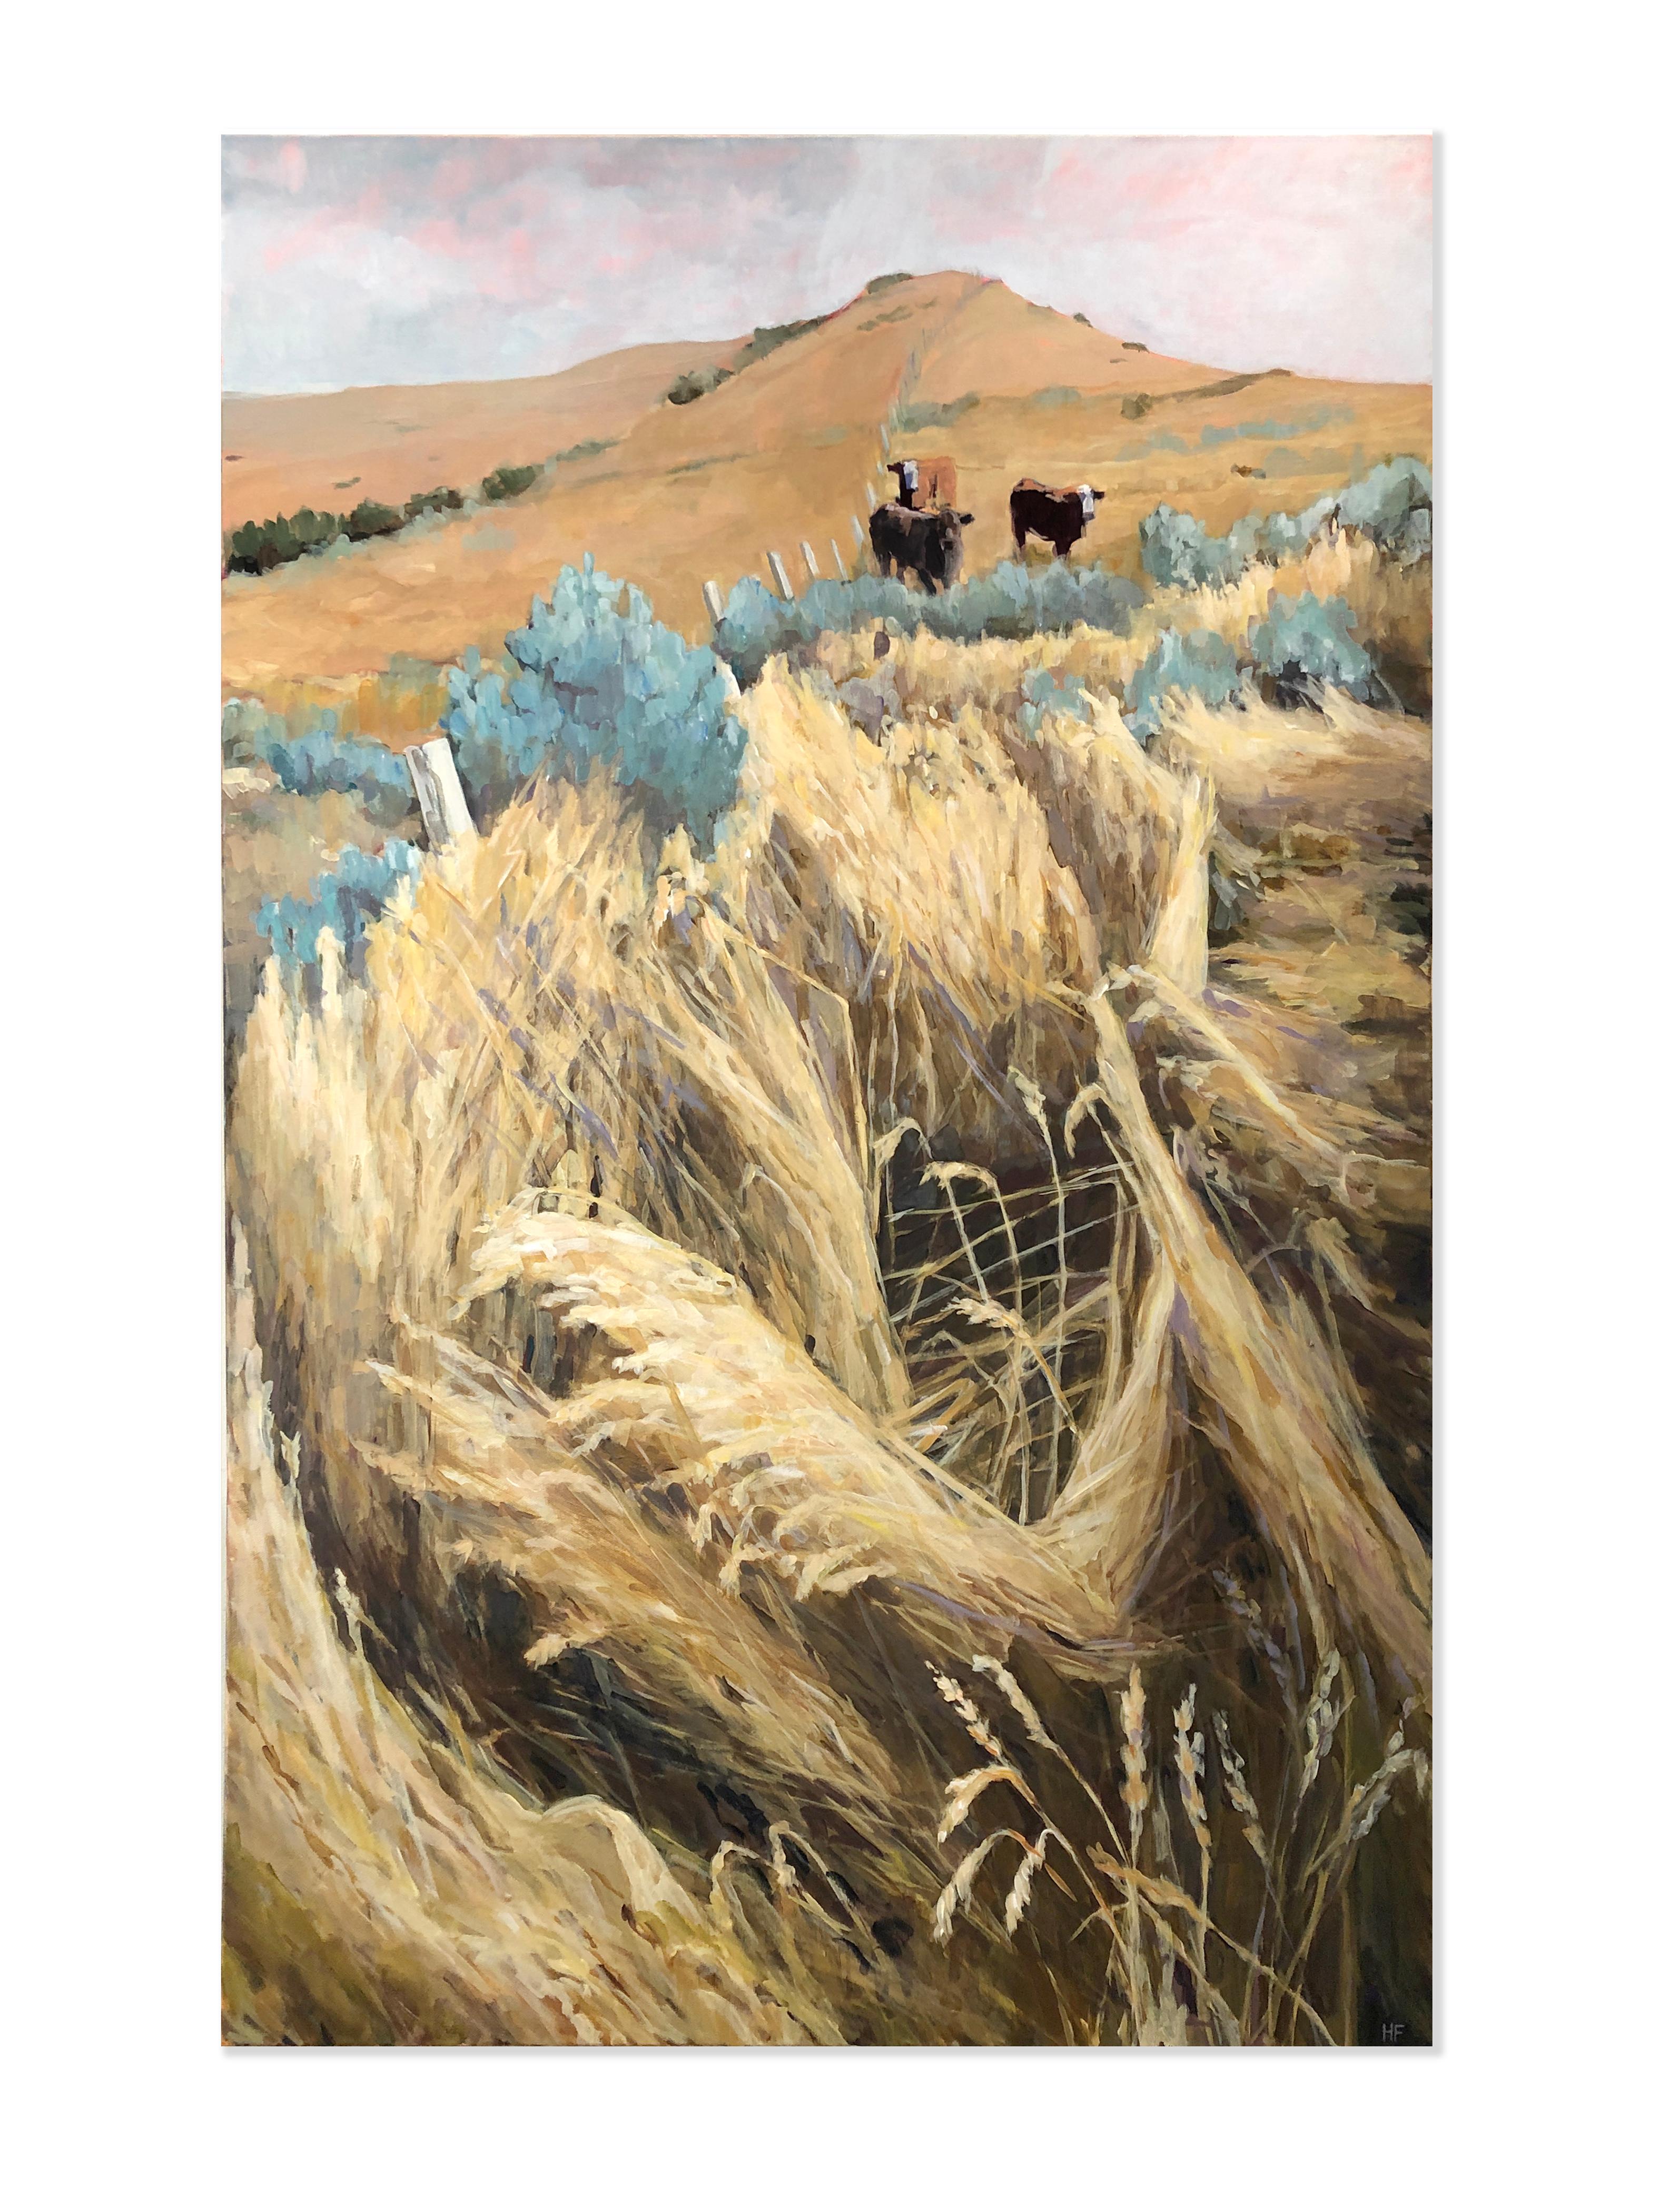 Tall Grass (cows, pasture, golden grasses, sage, tan, pink toned sky) - Beige Landscape Painting by Heather Foster